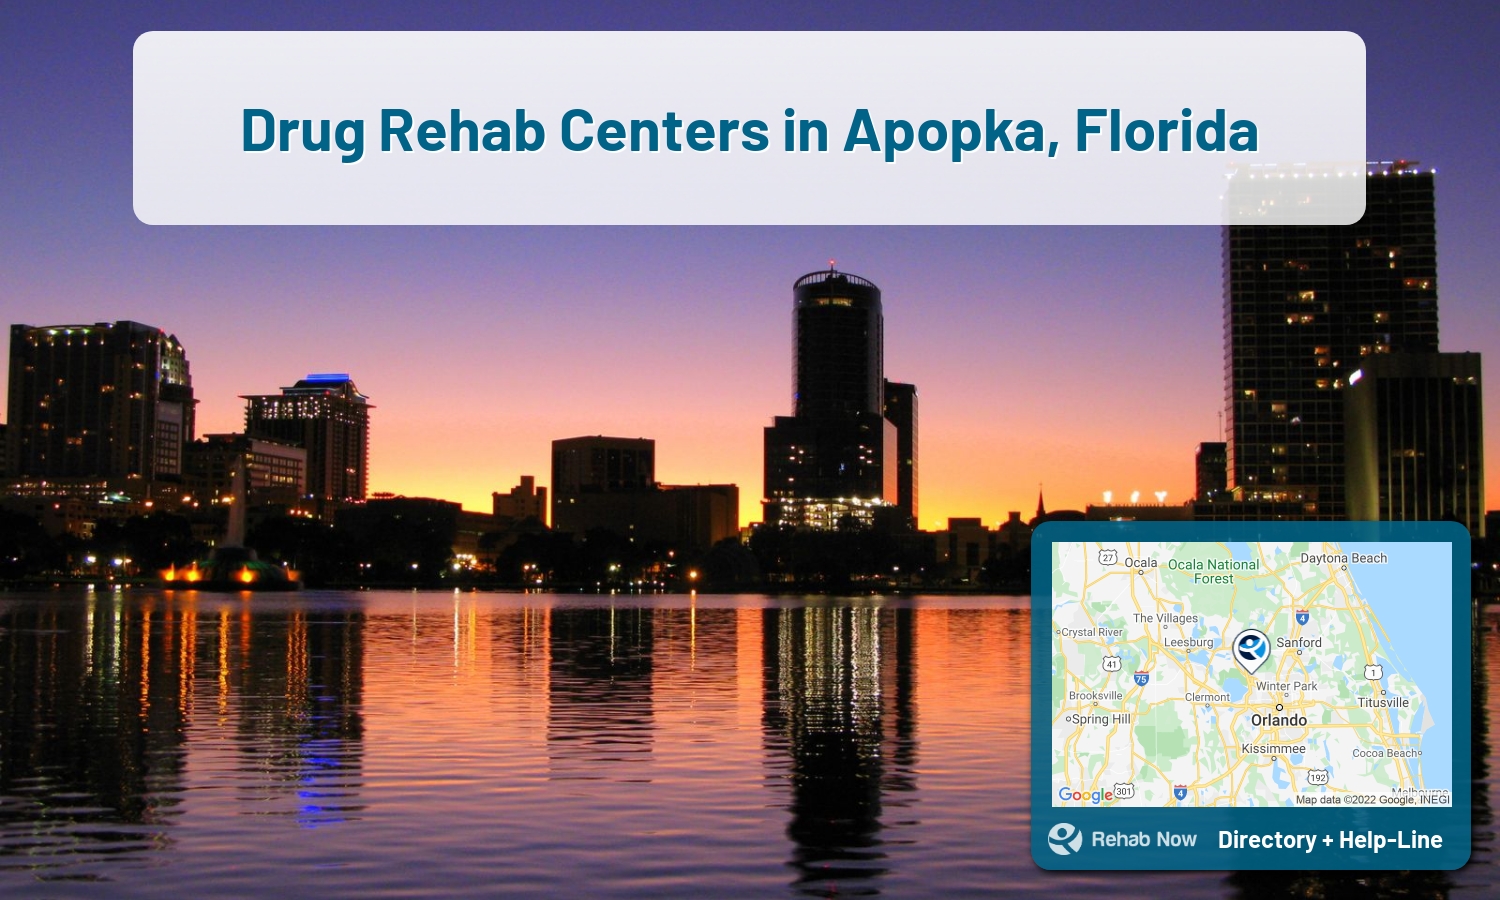 Let our expert counselors help find the best addiction treatment in Apopka, Florida now with a free call to our hotline.